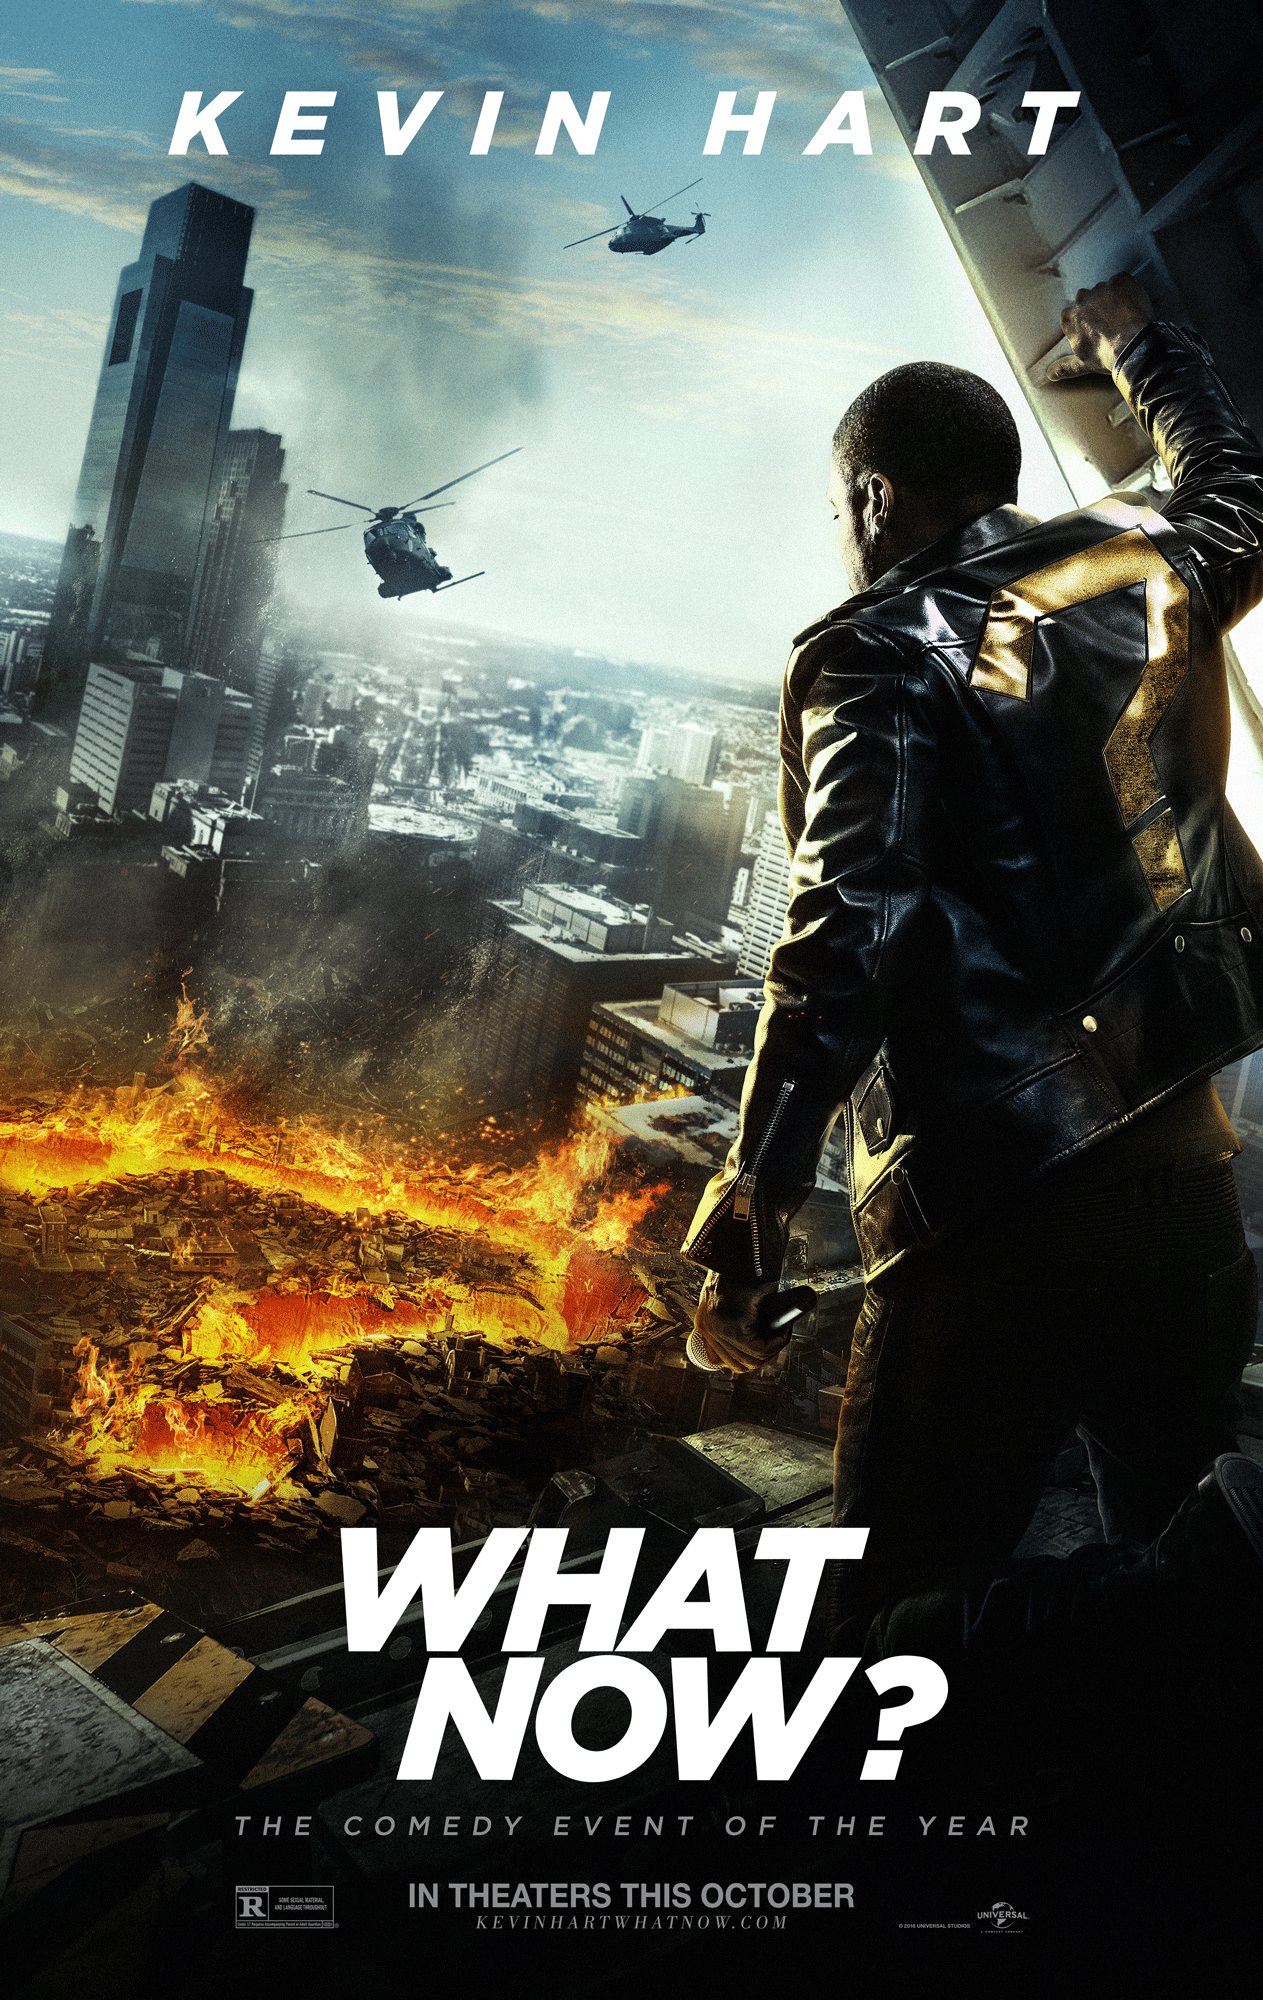 Kevin Hart: What Now? Poster. In Theaters Now